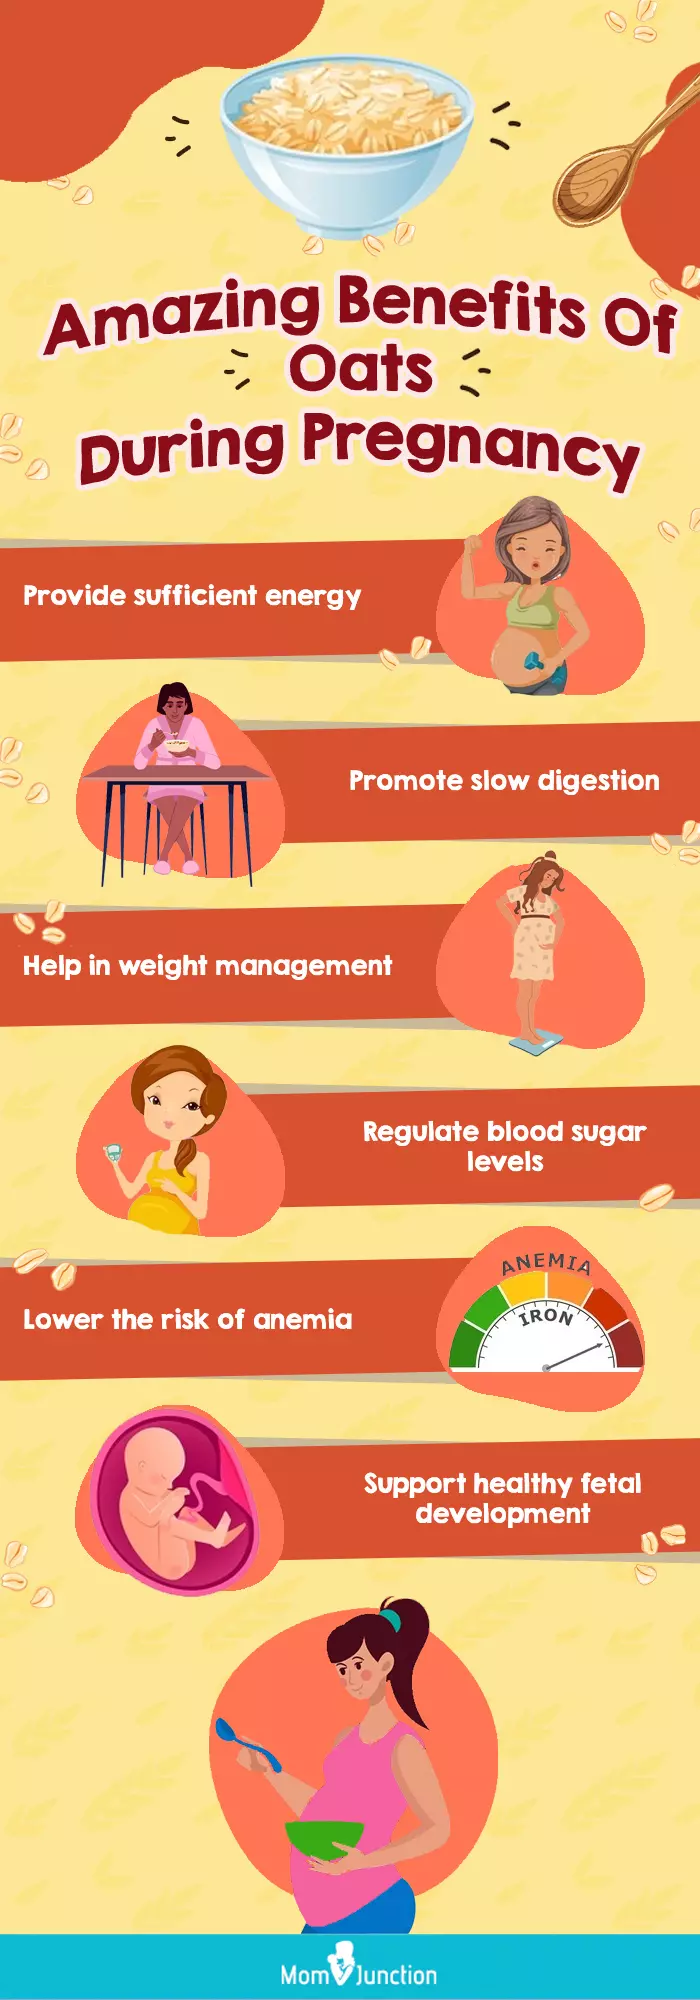 amazing benefits of oats during pregnancy (infographic)